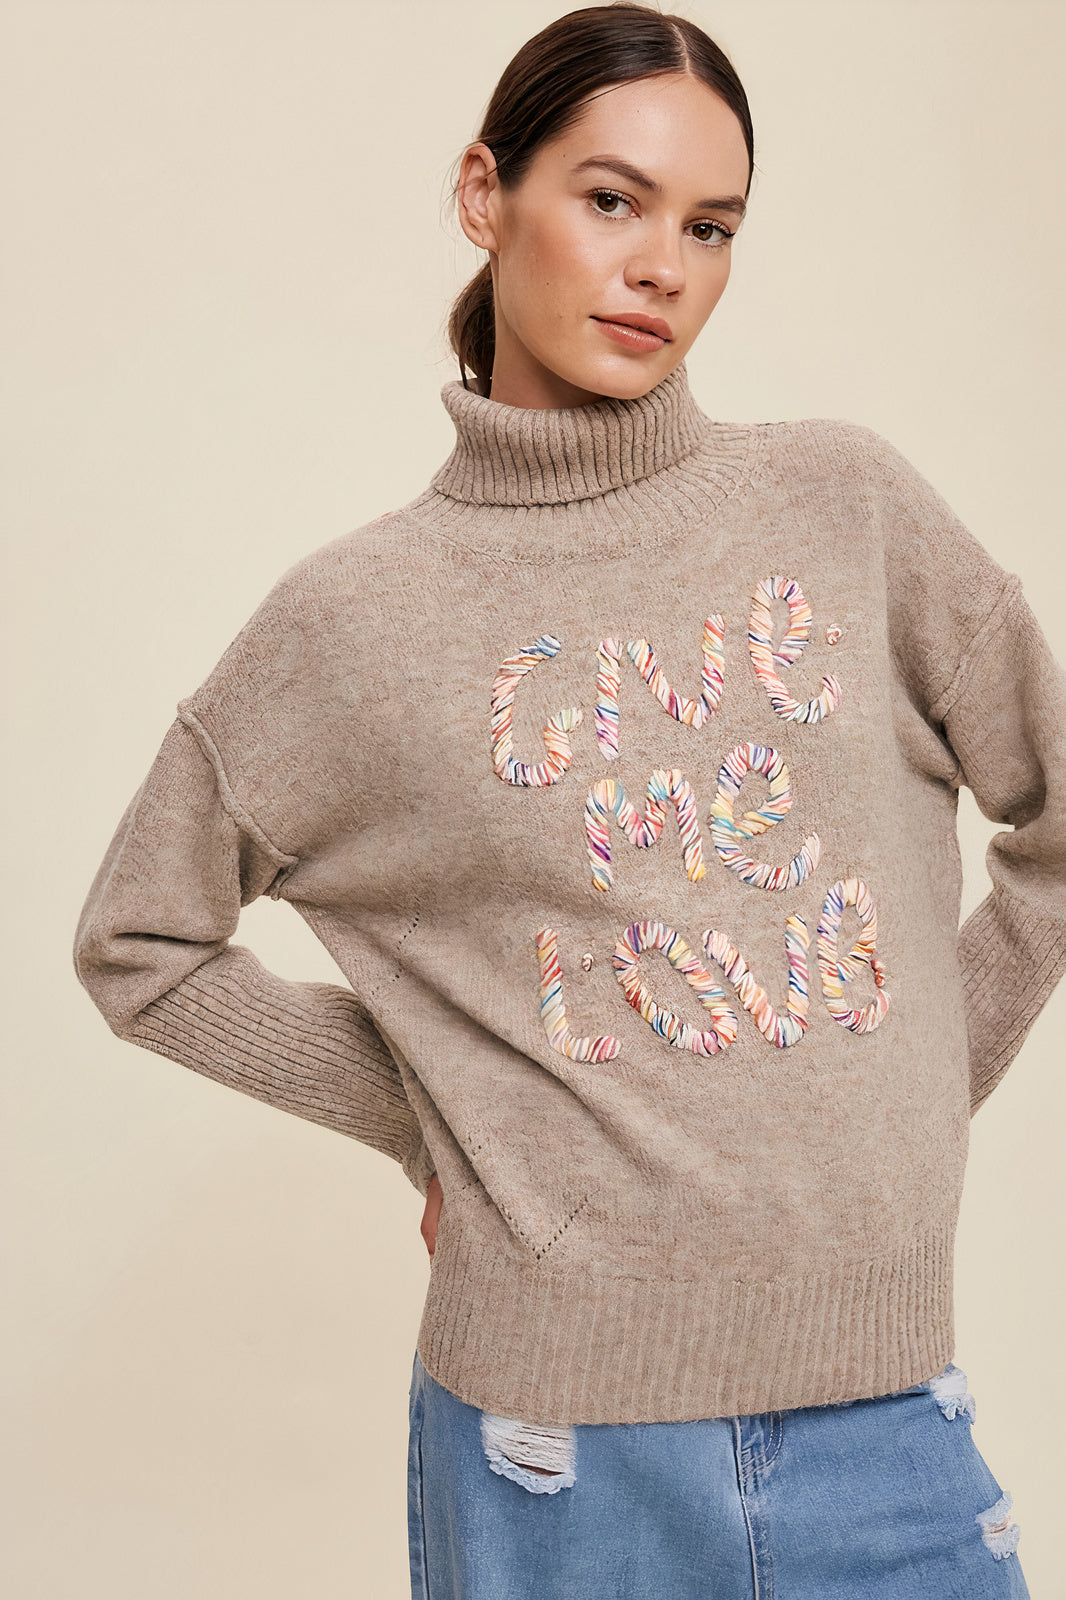 Give Me Love Stitched Mock Neck Sweater